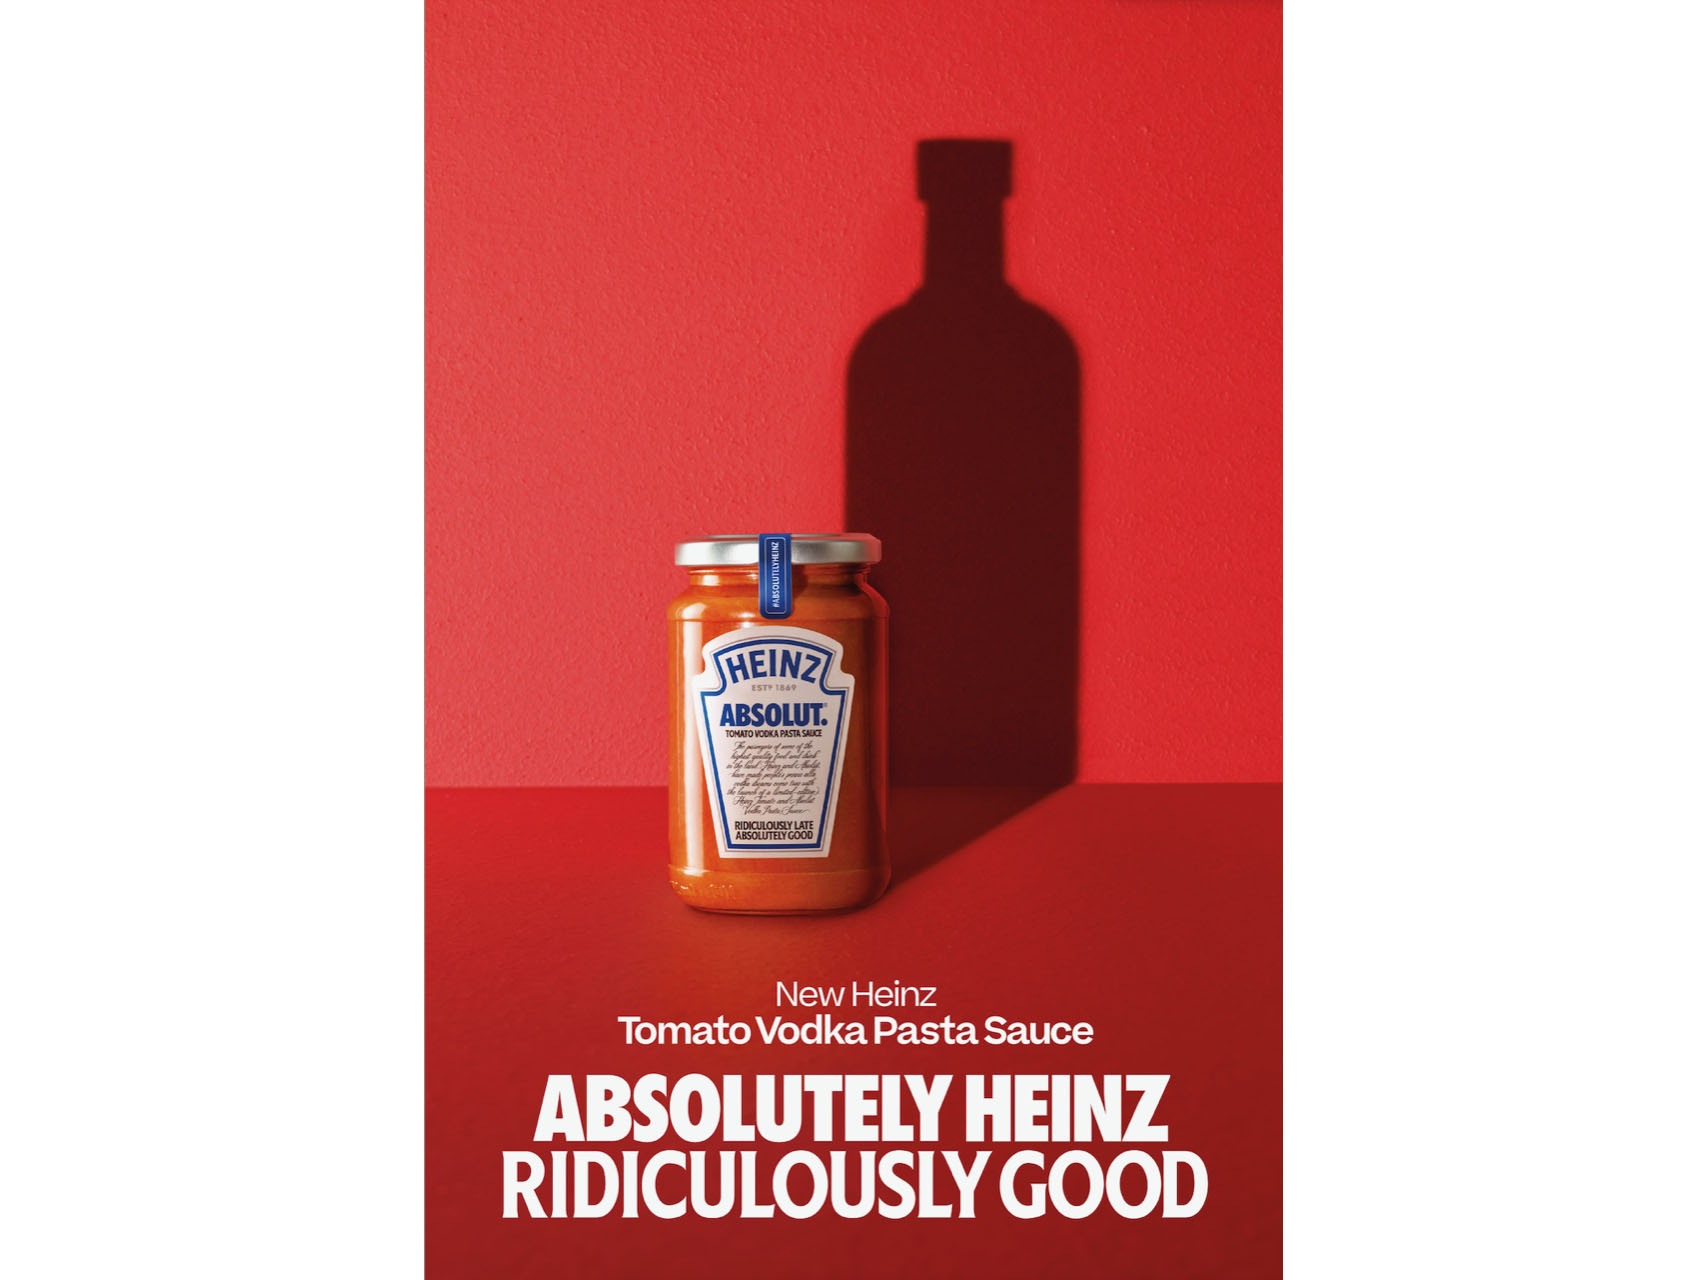 Campaign from Wunderman Thompson Spain pays homage to iconic Absolut ads with a Heinz twist